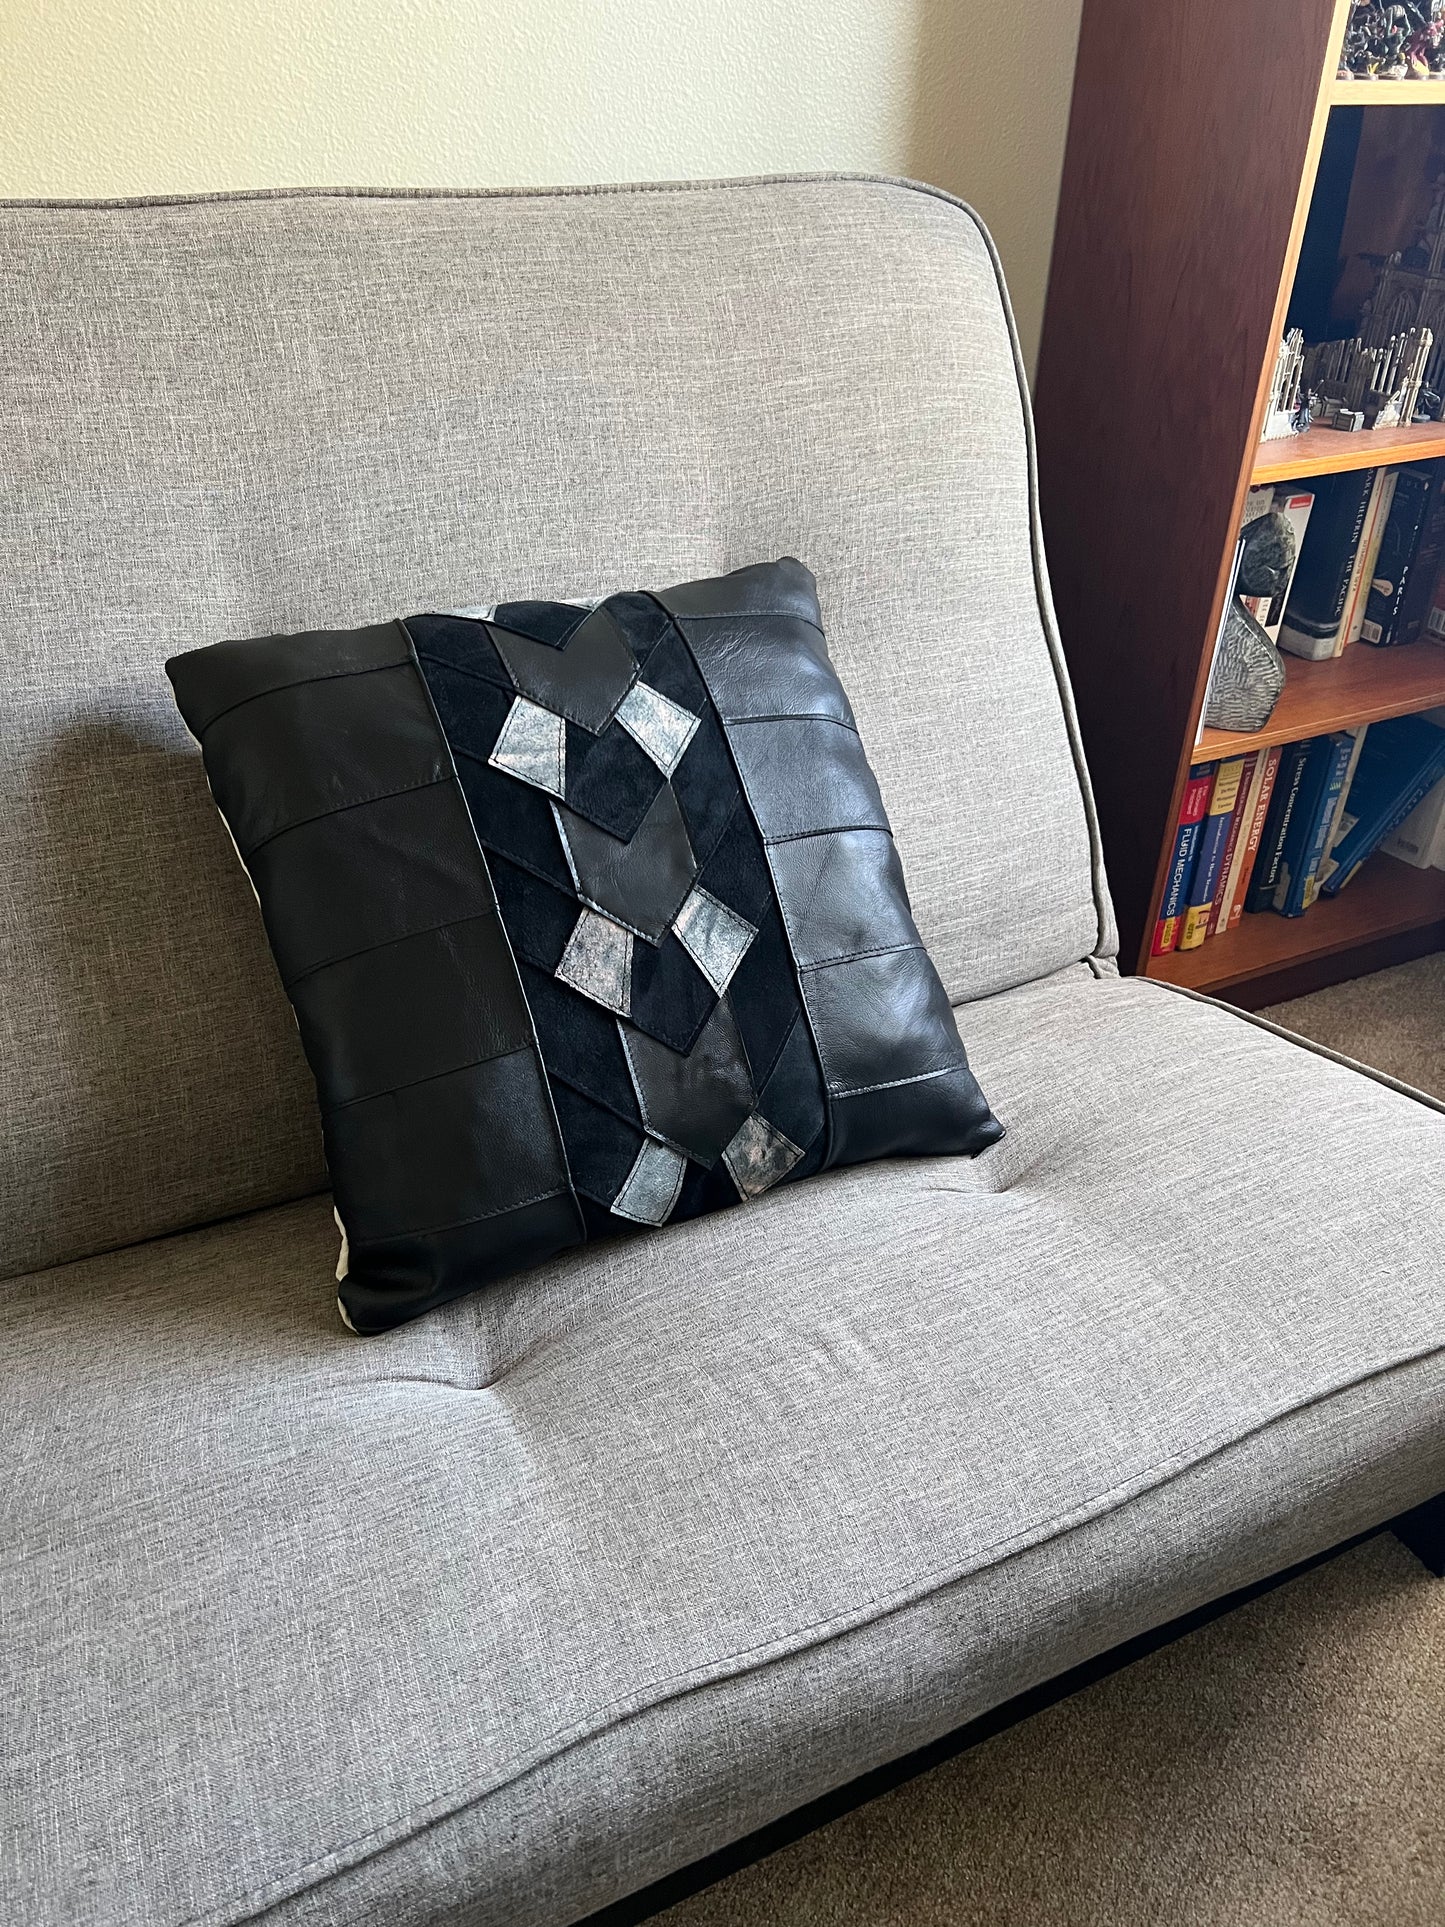 Leather Pillow Cover | Pieced Leather Pillow | Art Throw Pillow | Pillow Cover